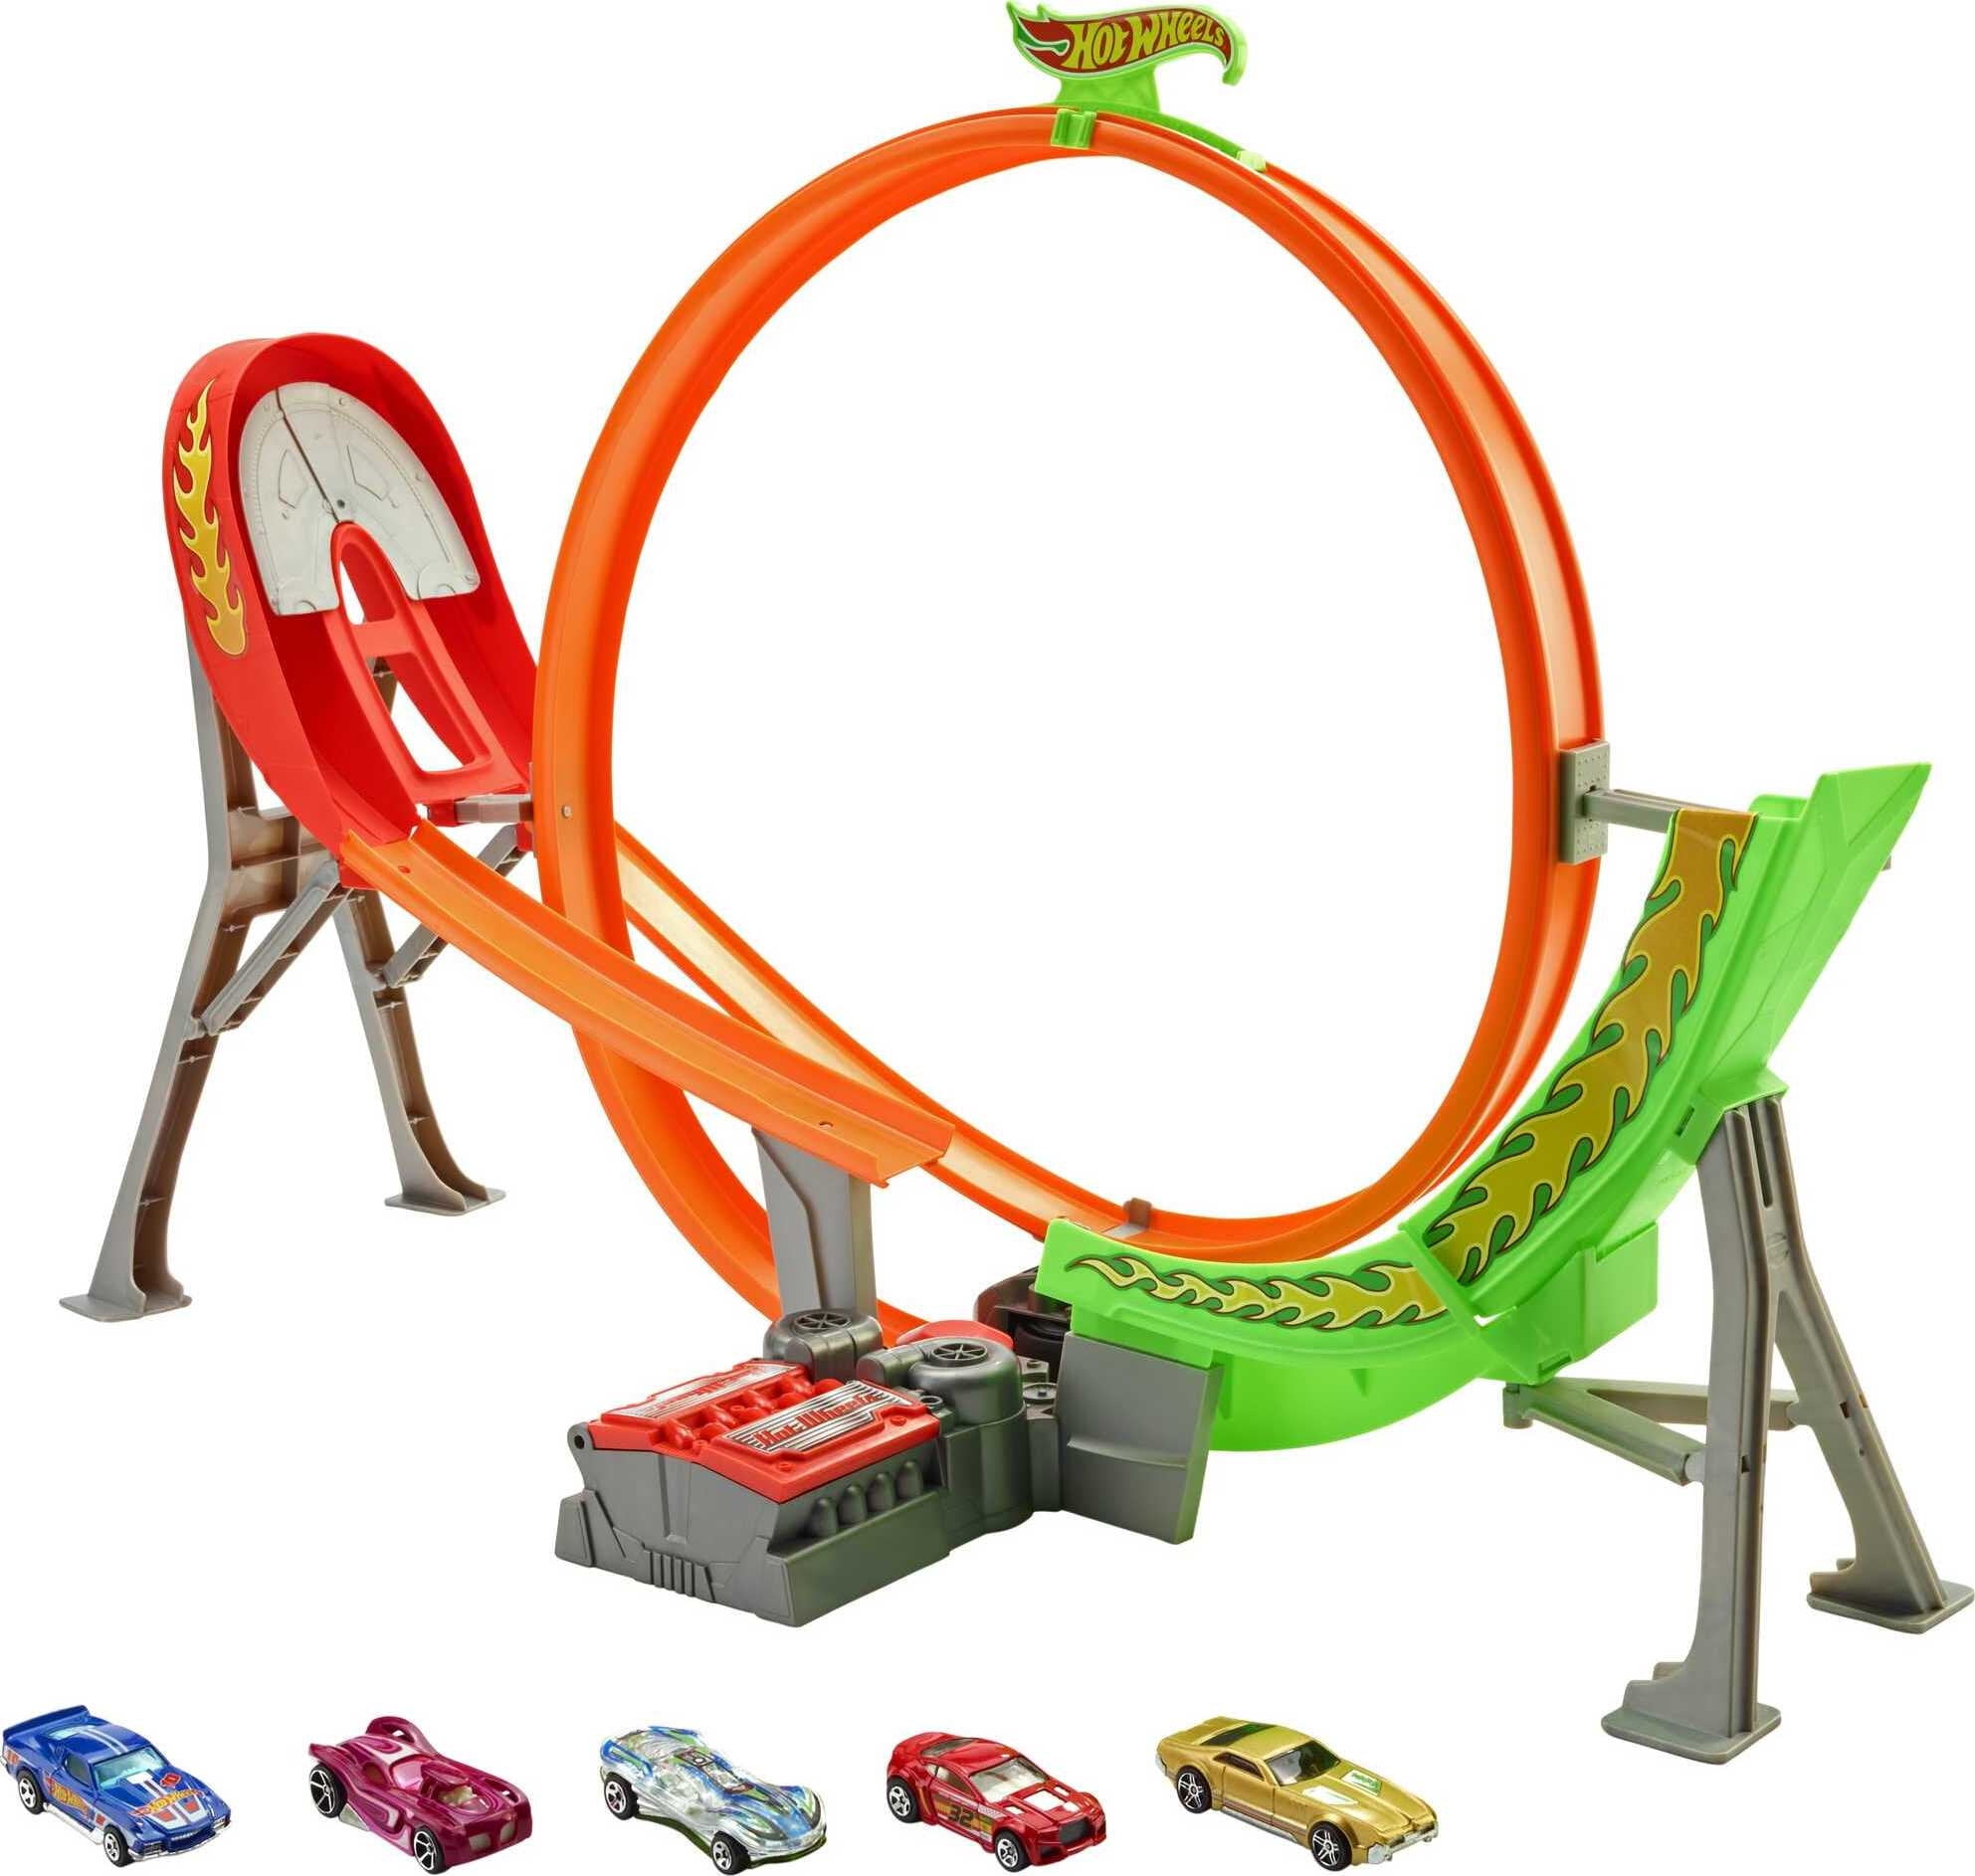 Hot Wheels Action Power Shift Motorized Raceway Track Set with 5 Cars, Child 5Y+